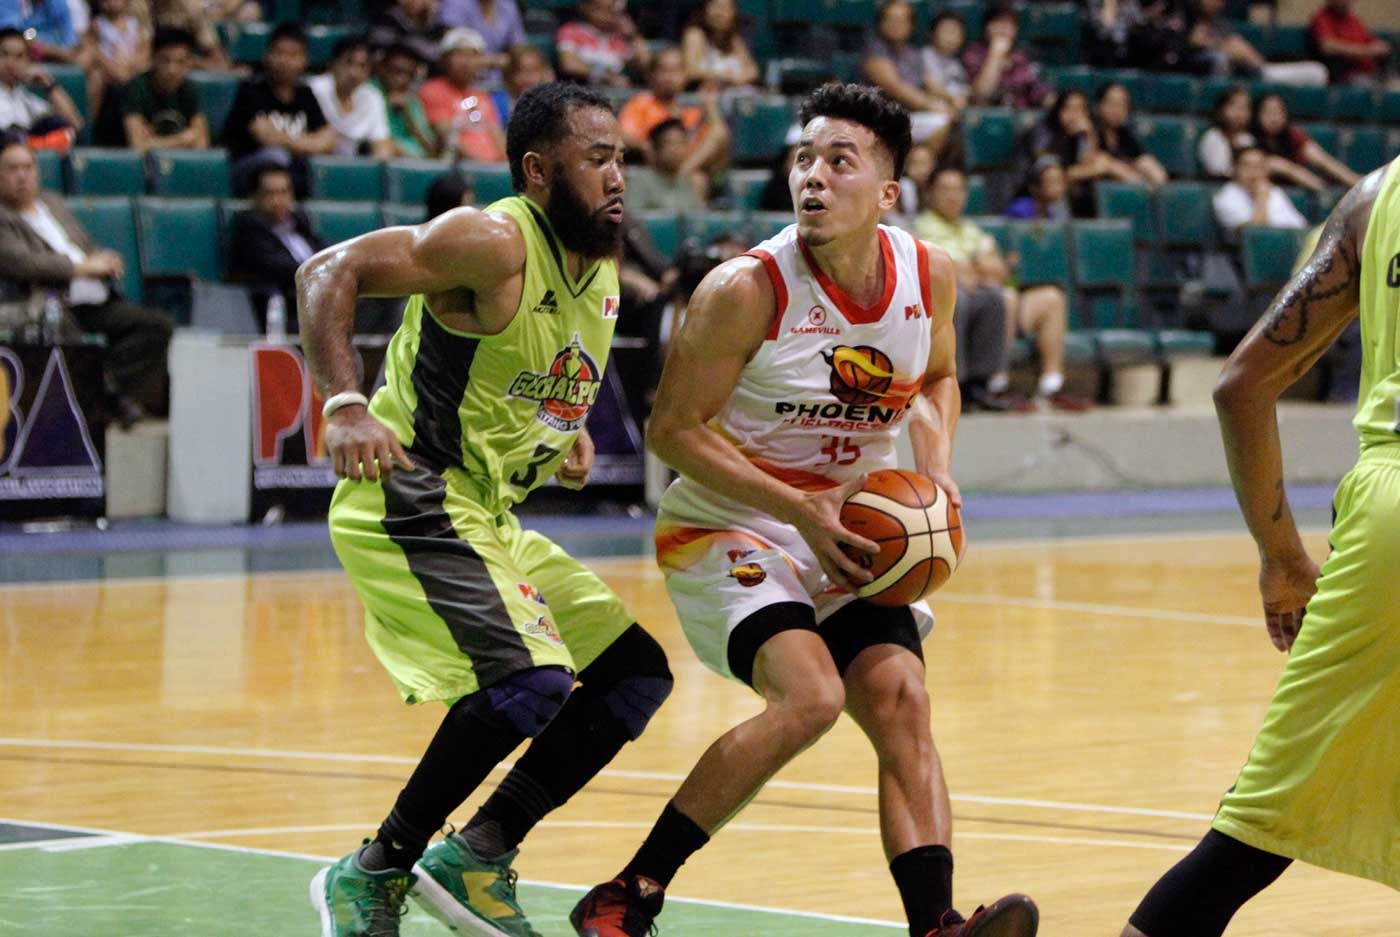 Never satisfied, rookie Matthew Wright continues to learn the PBA game